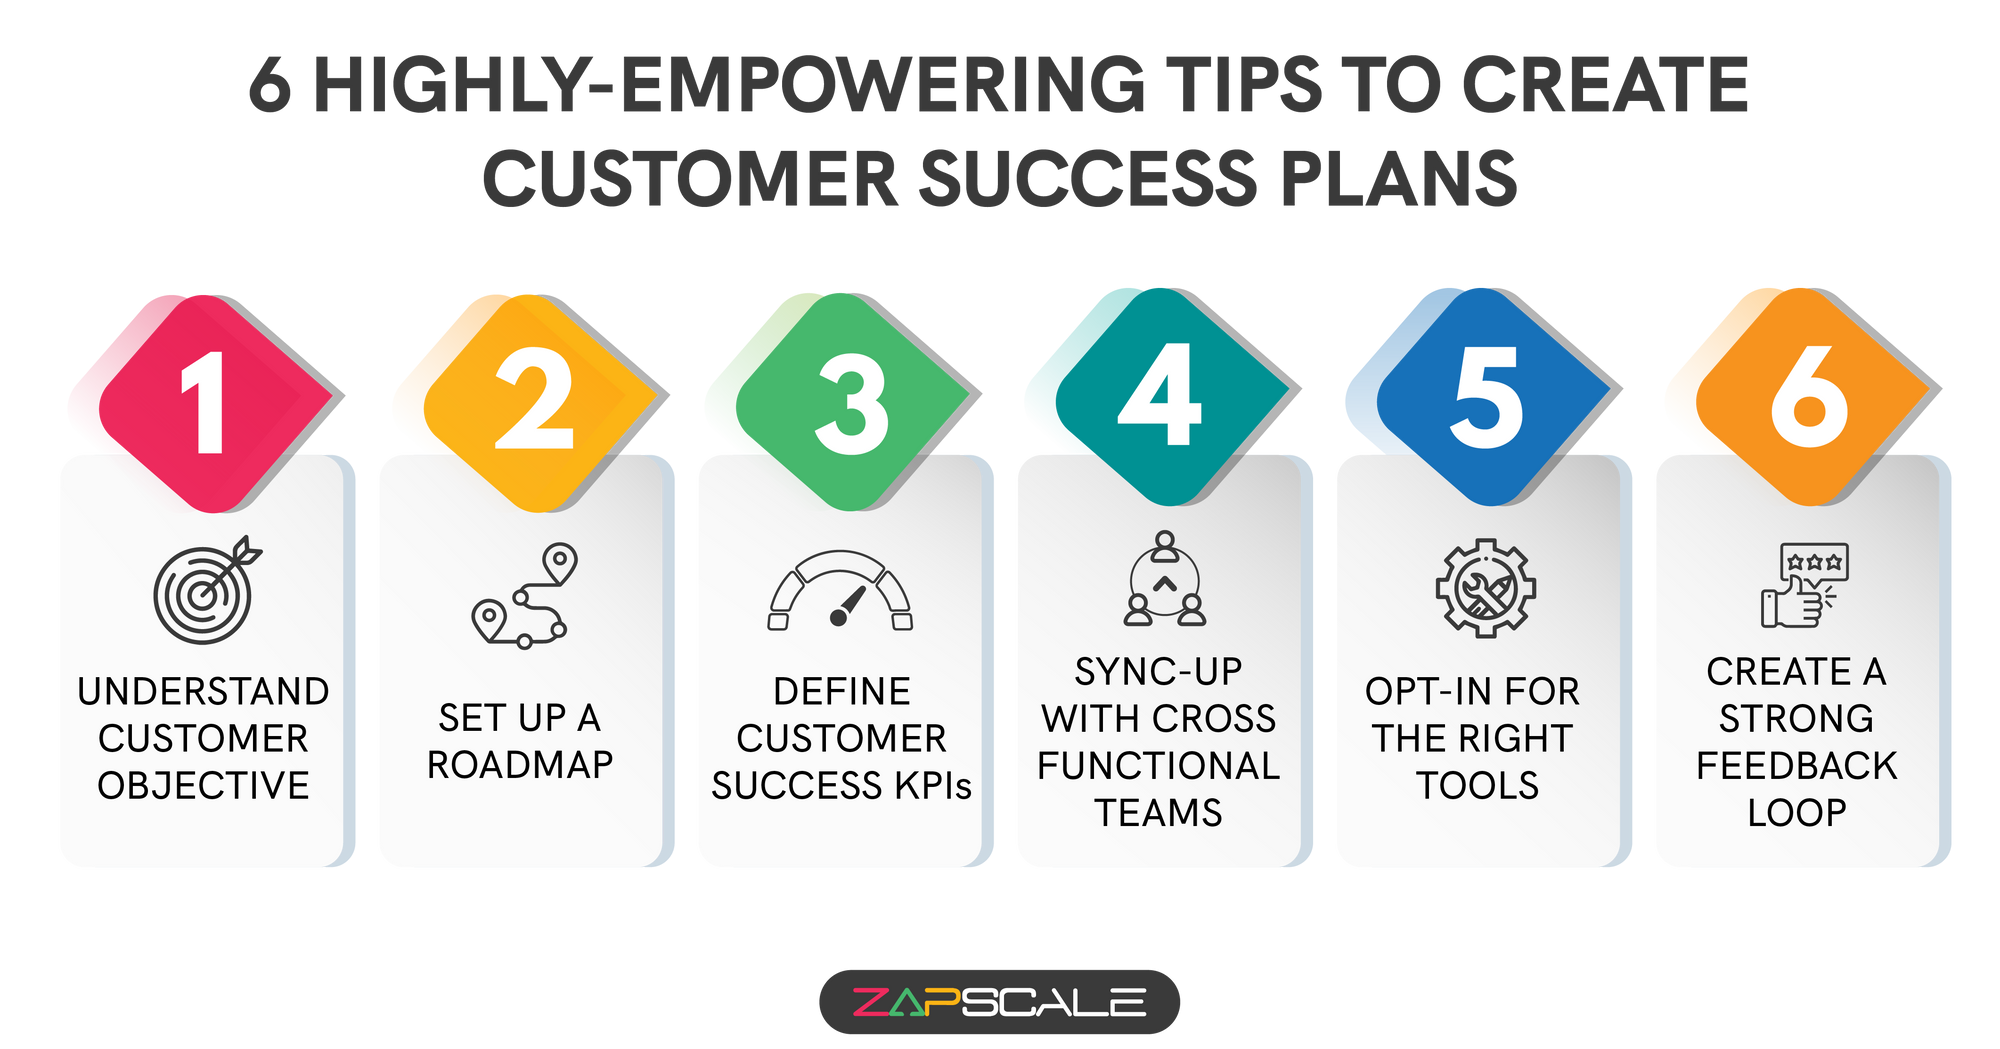 6 highly-empowering tips to create customer success plans